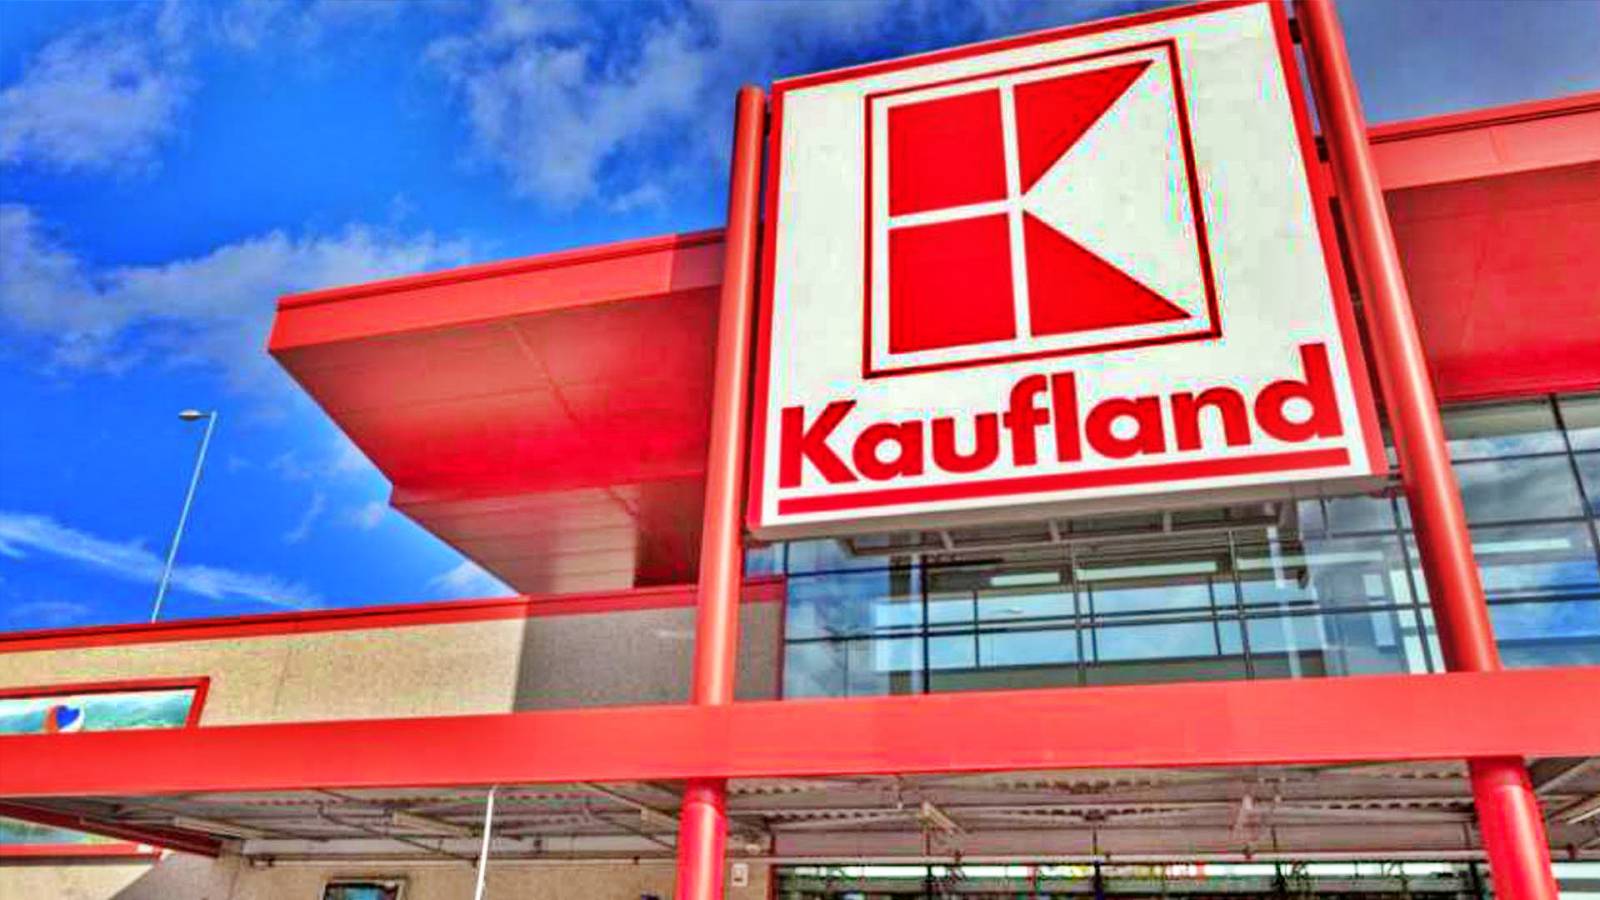 Kaufland Urgent customer information Dangerous product Withdrawn stores